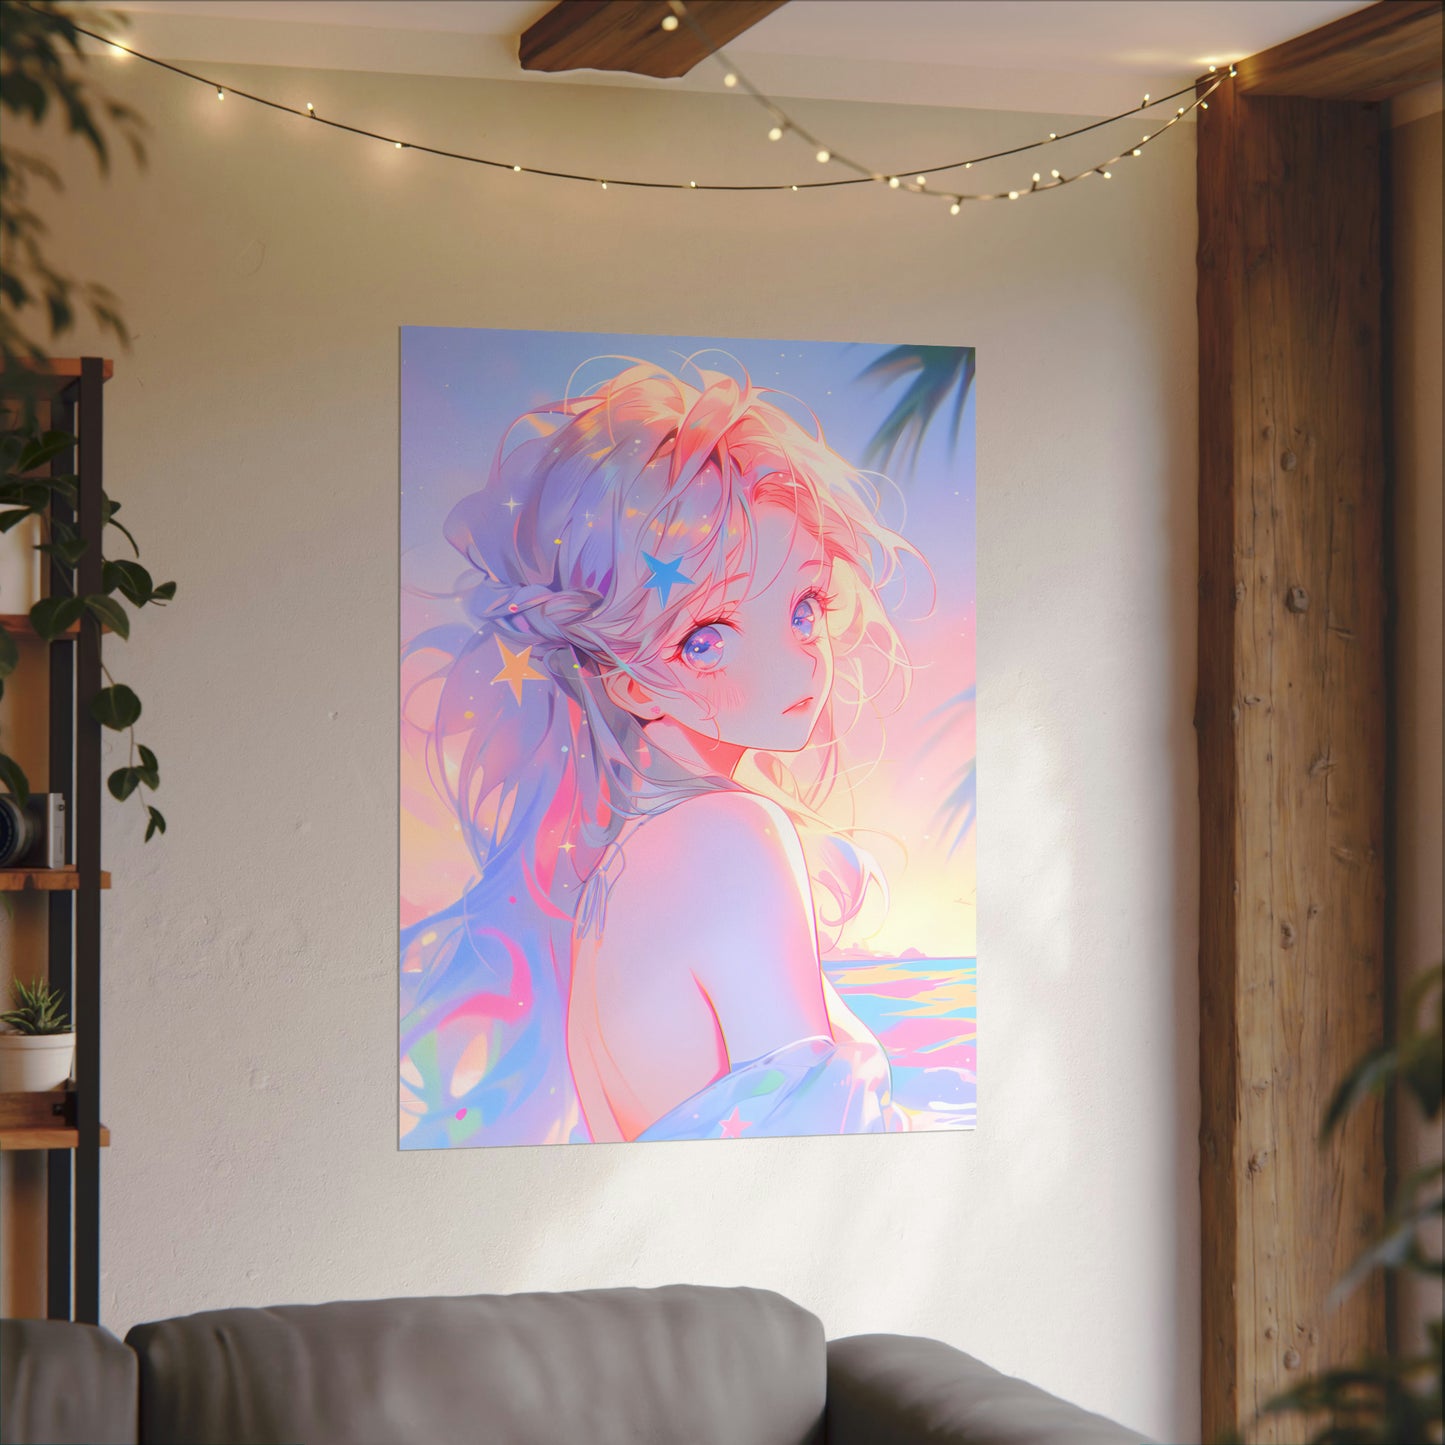 Stardust - Cute Anime Girl Watercolor Poster